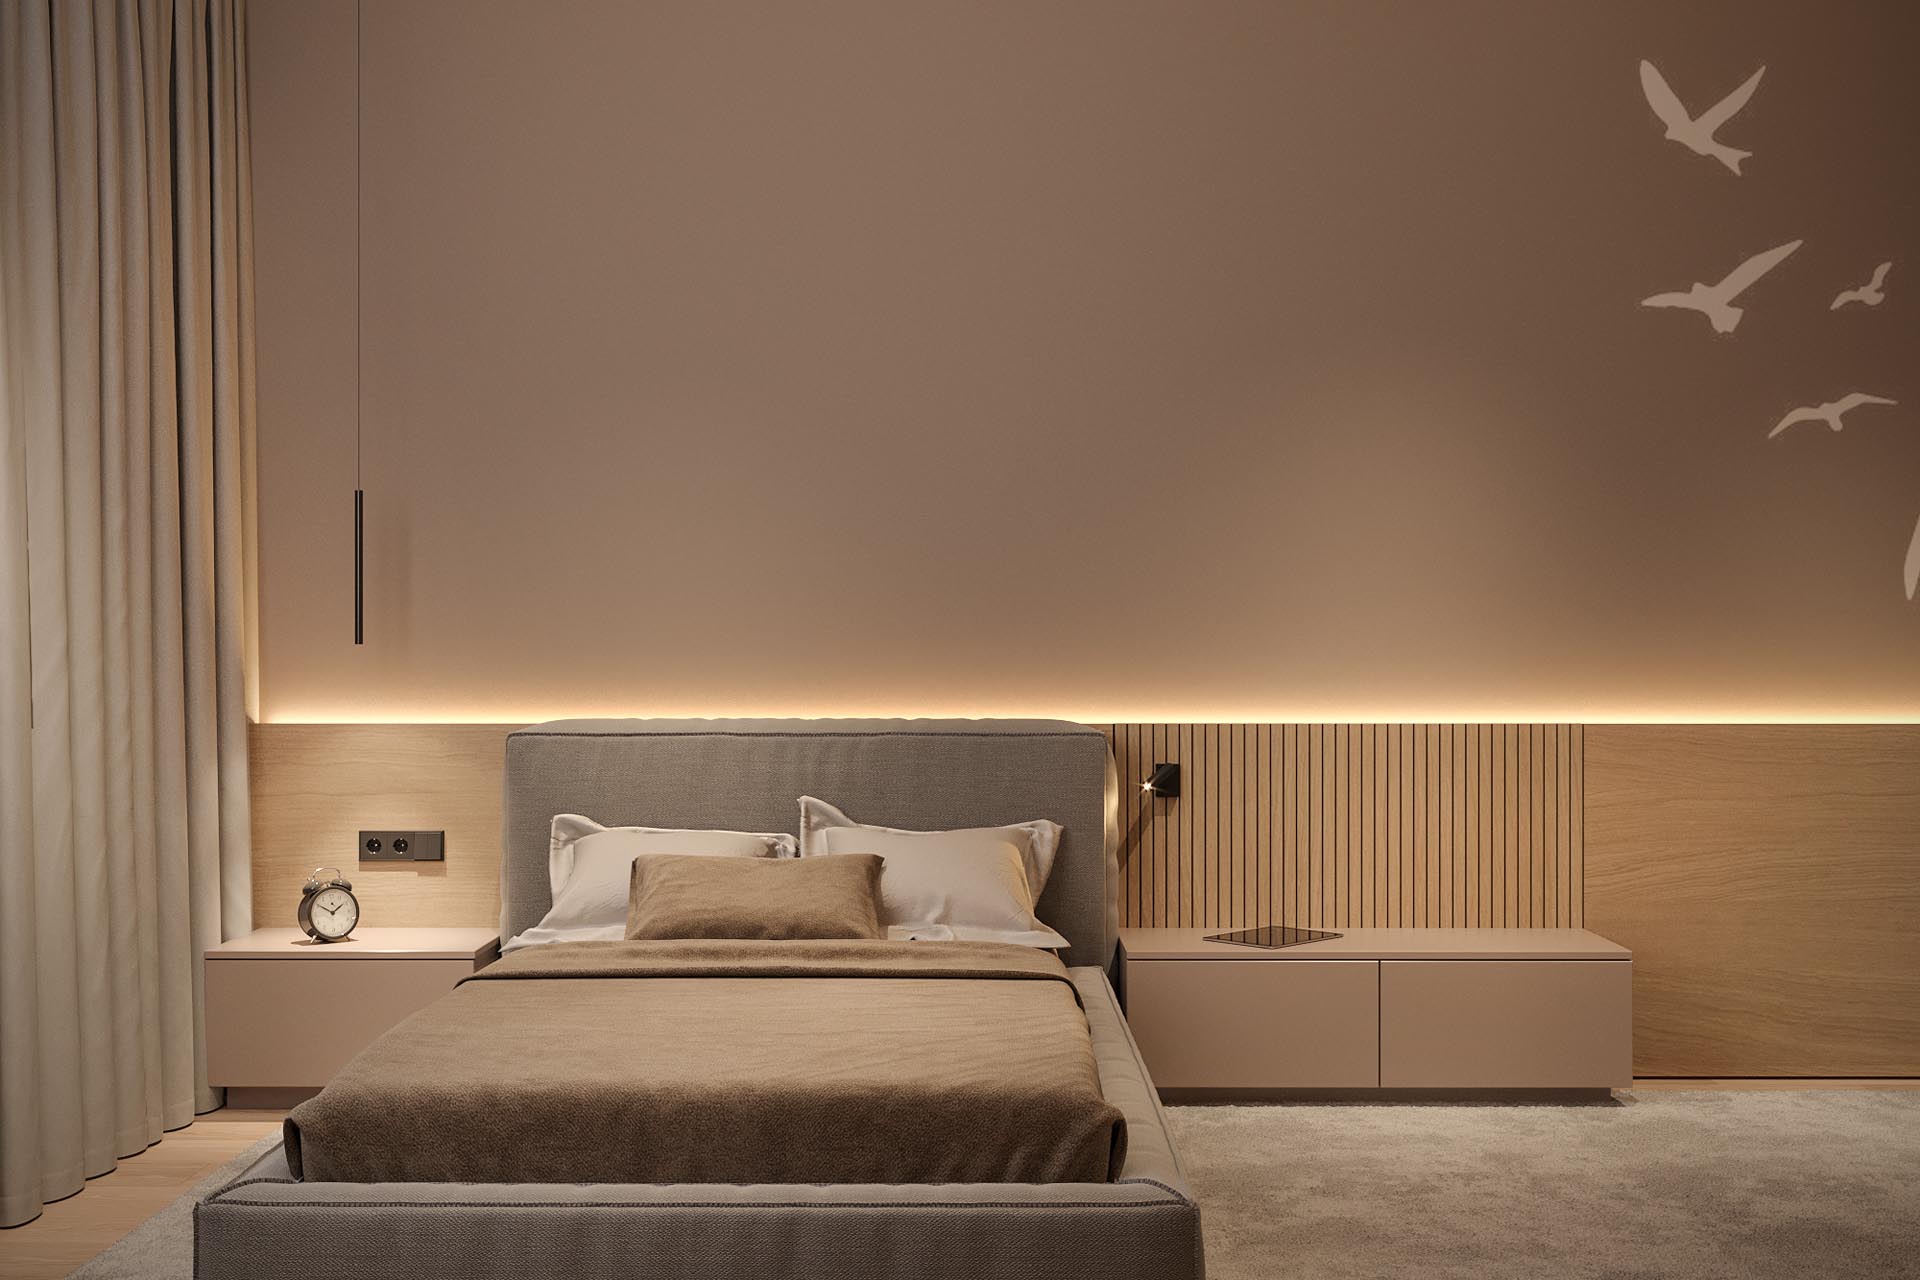 A modern bedroom with a backlit headboard and partial wood accent wall.